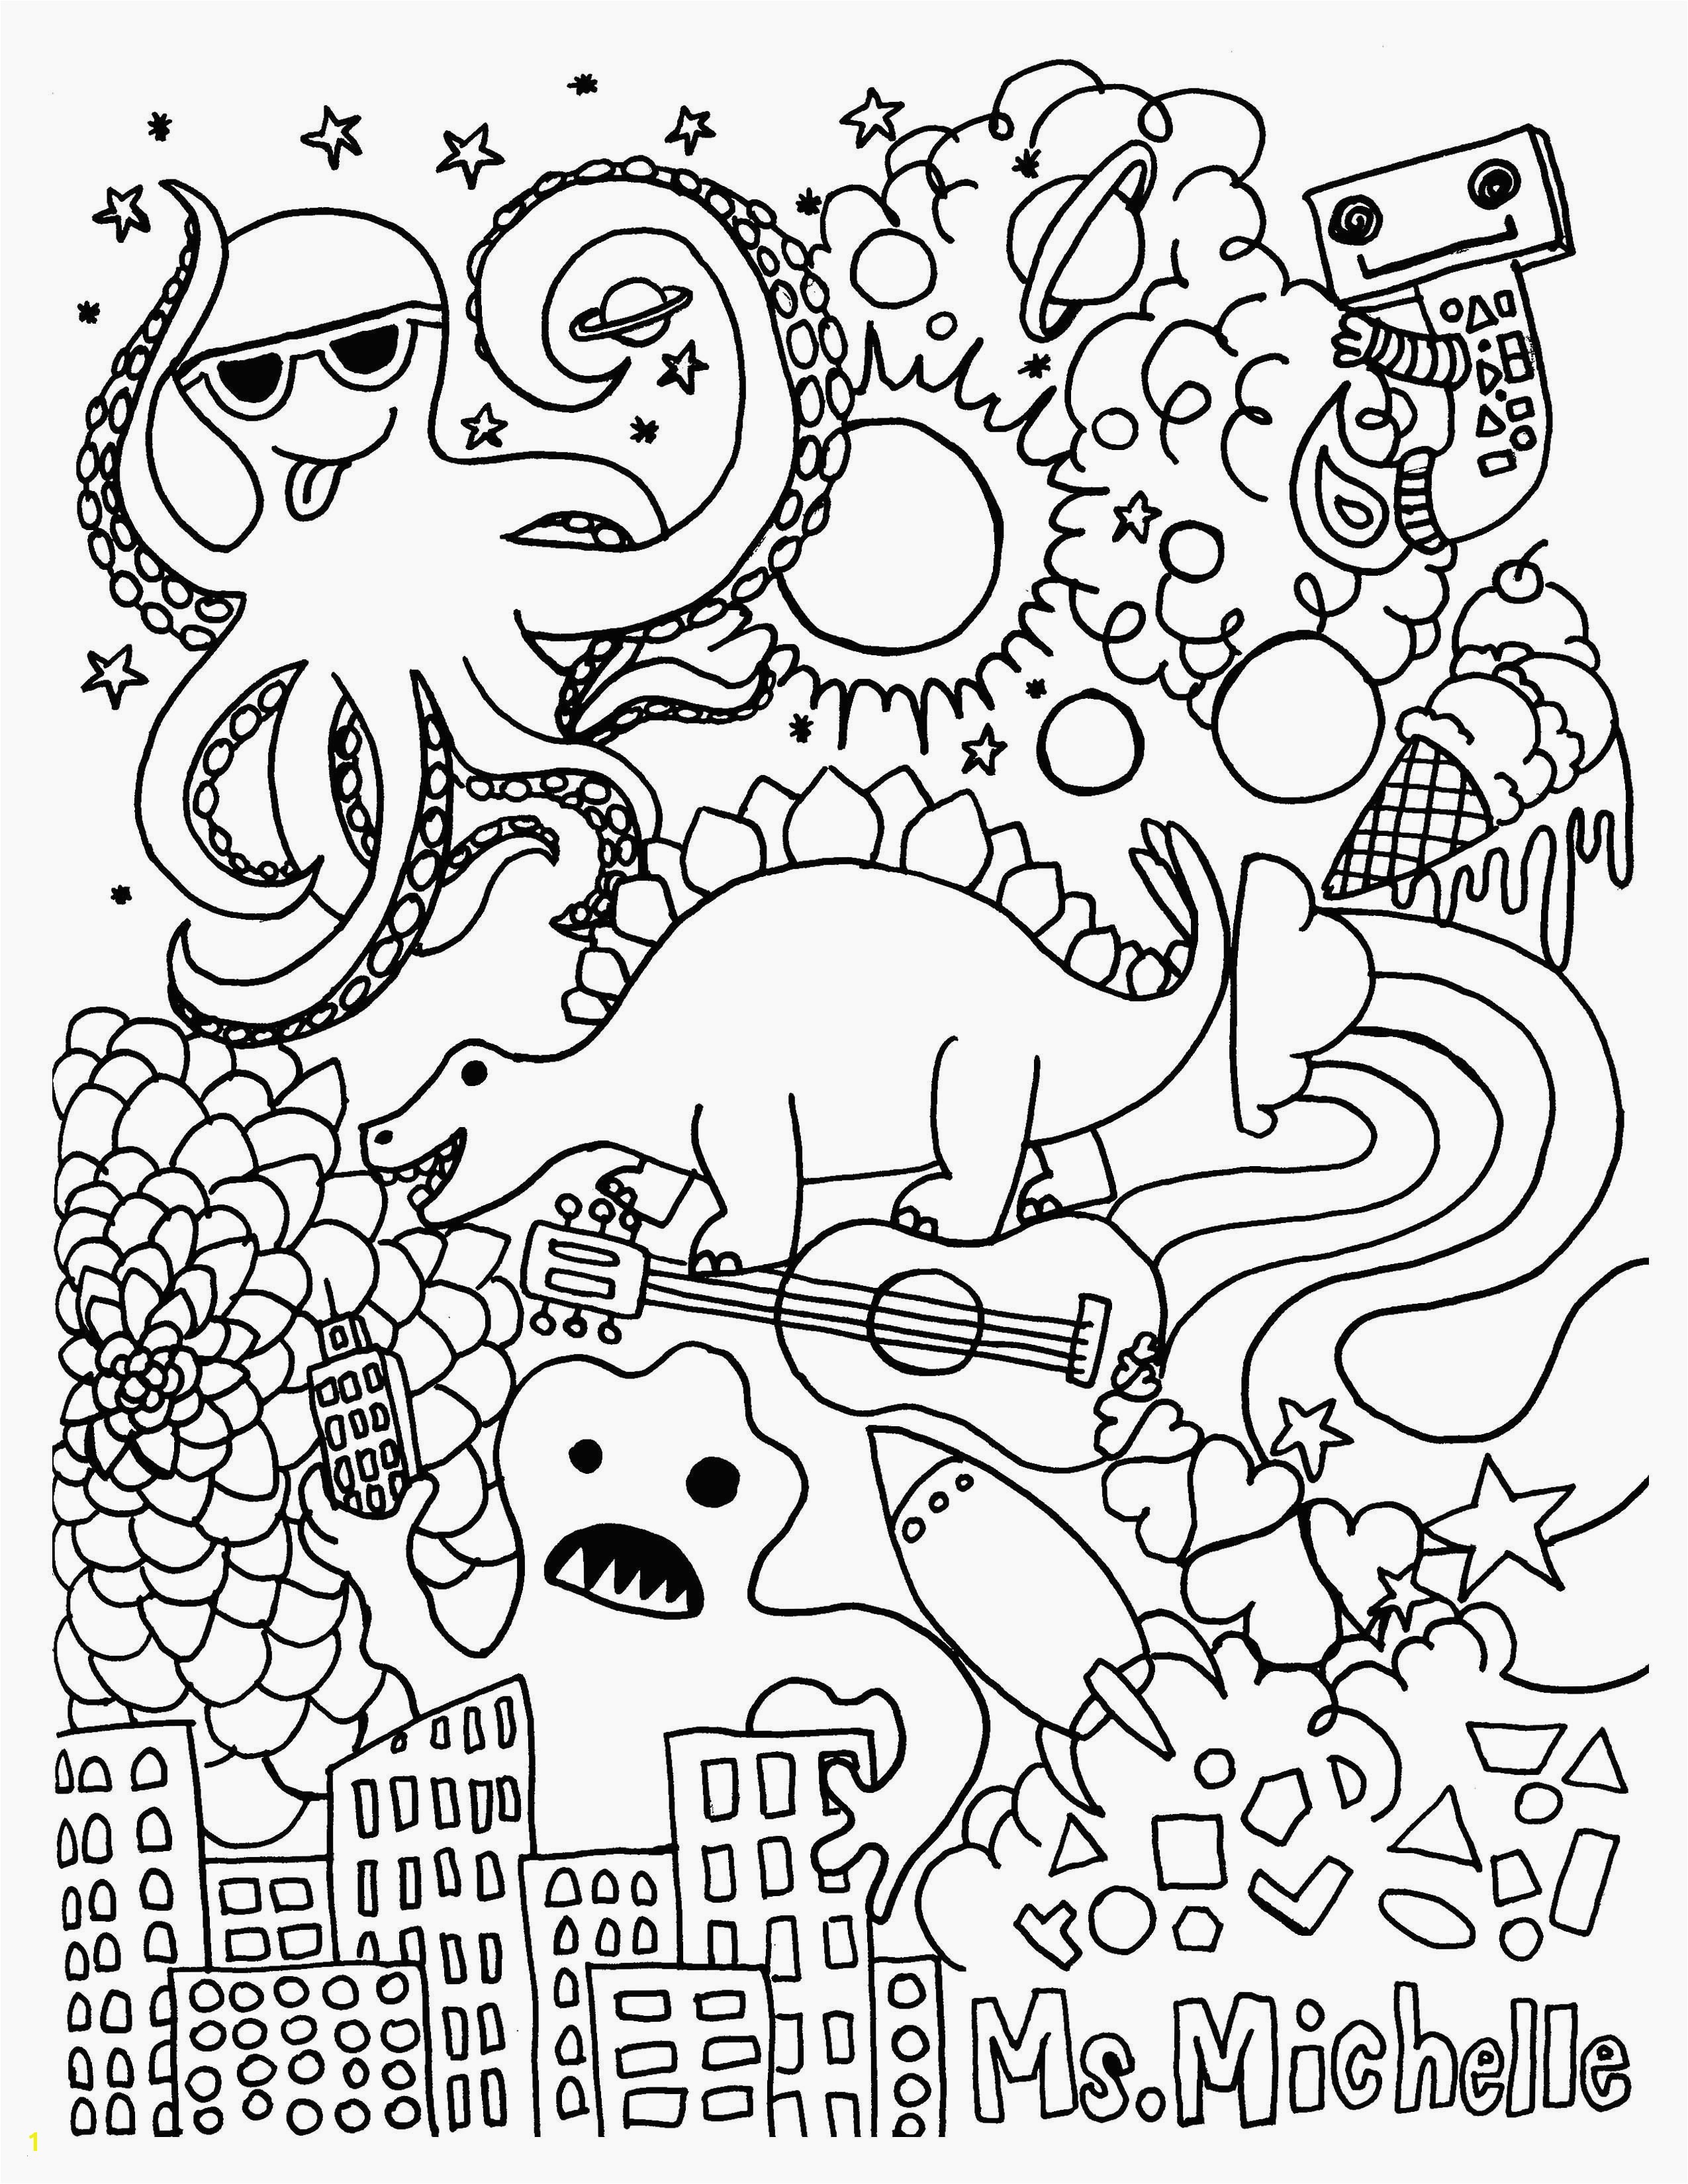 Free Printable Zombie Coloring Pages Inspirational Walking Dead Coloring Page Letramac